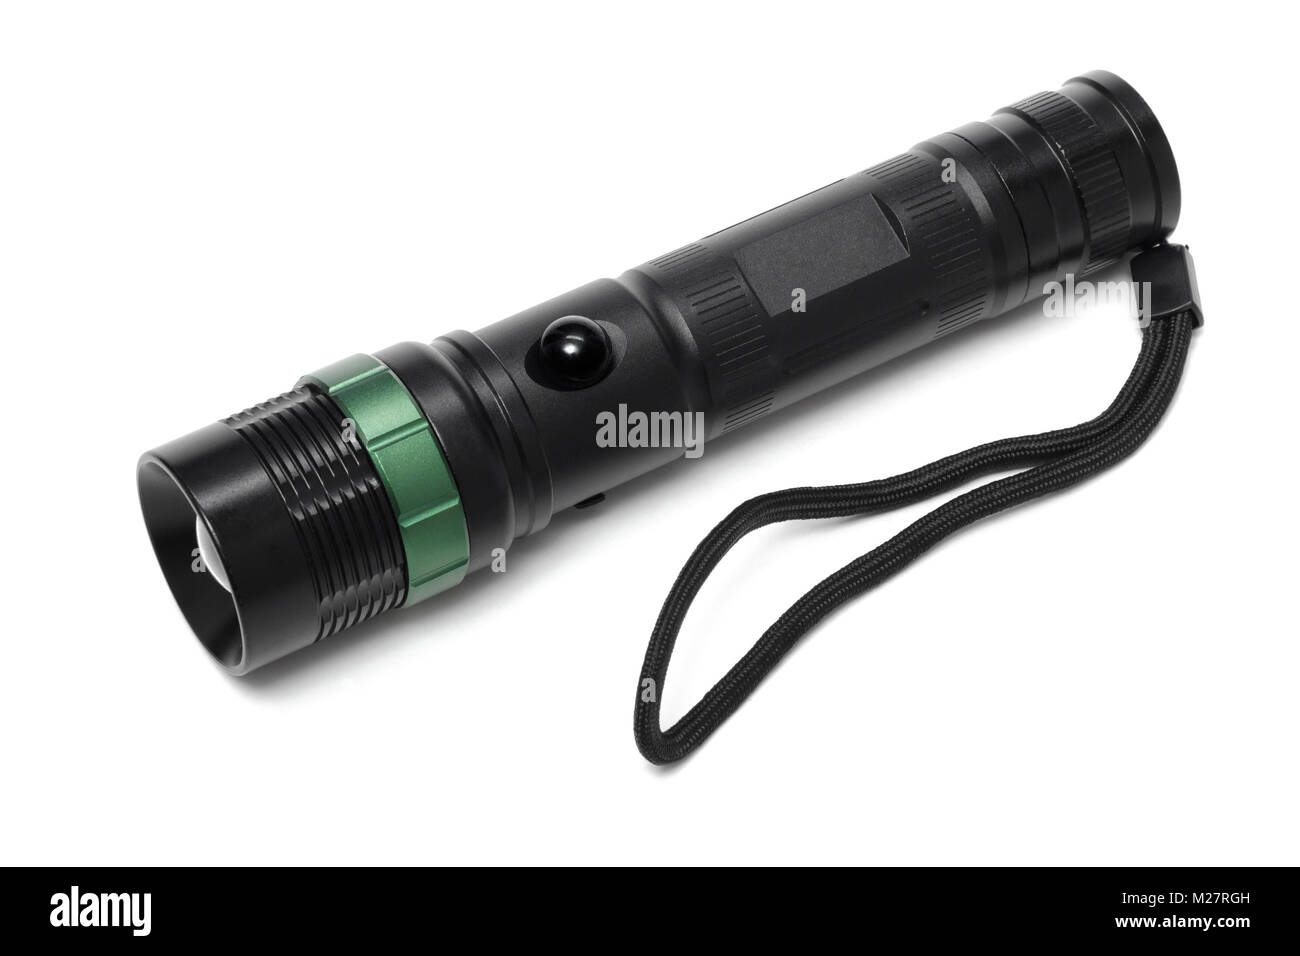 Flashlight LED black color with metal hull isolated on white Stock Photo